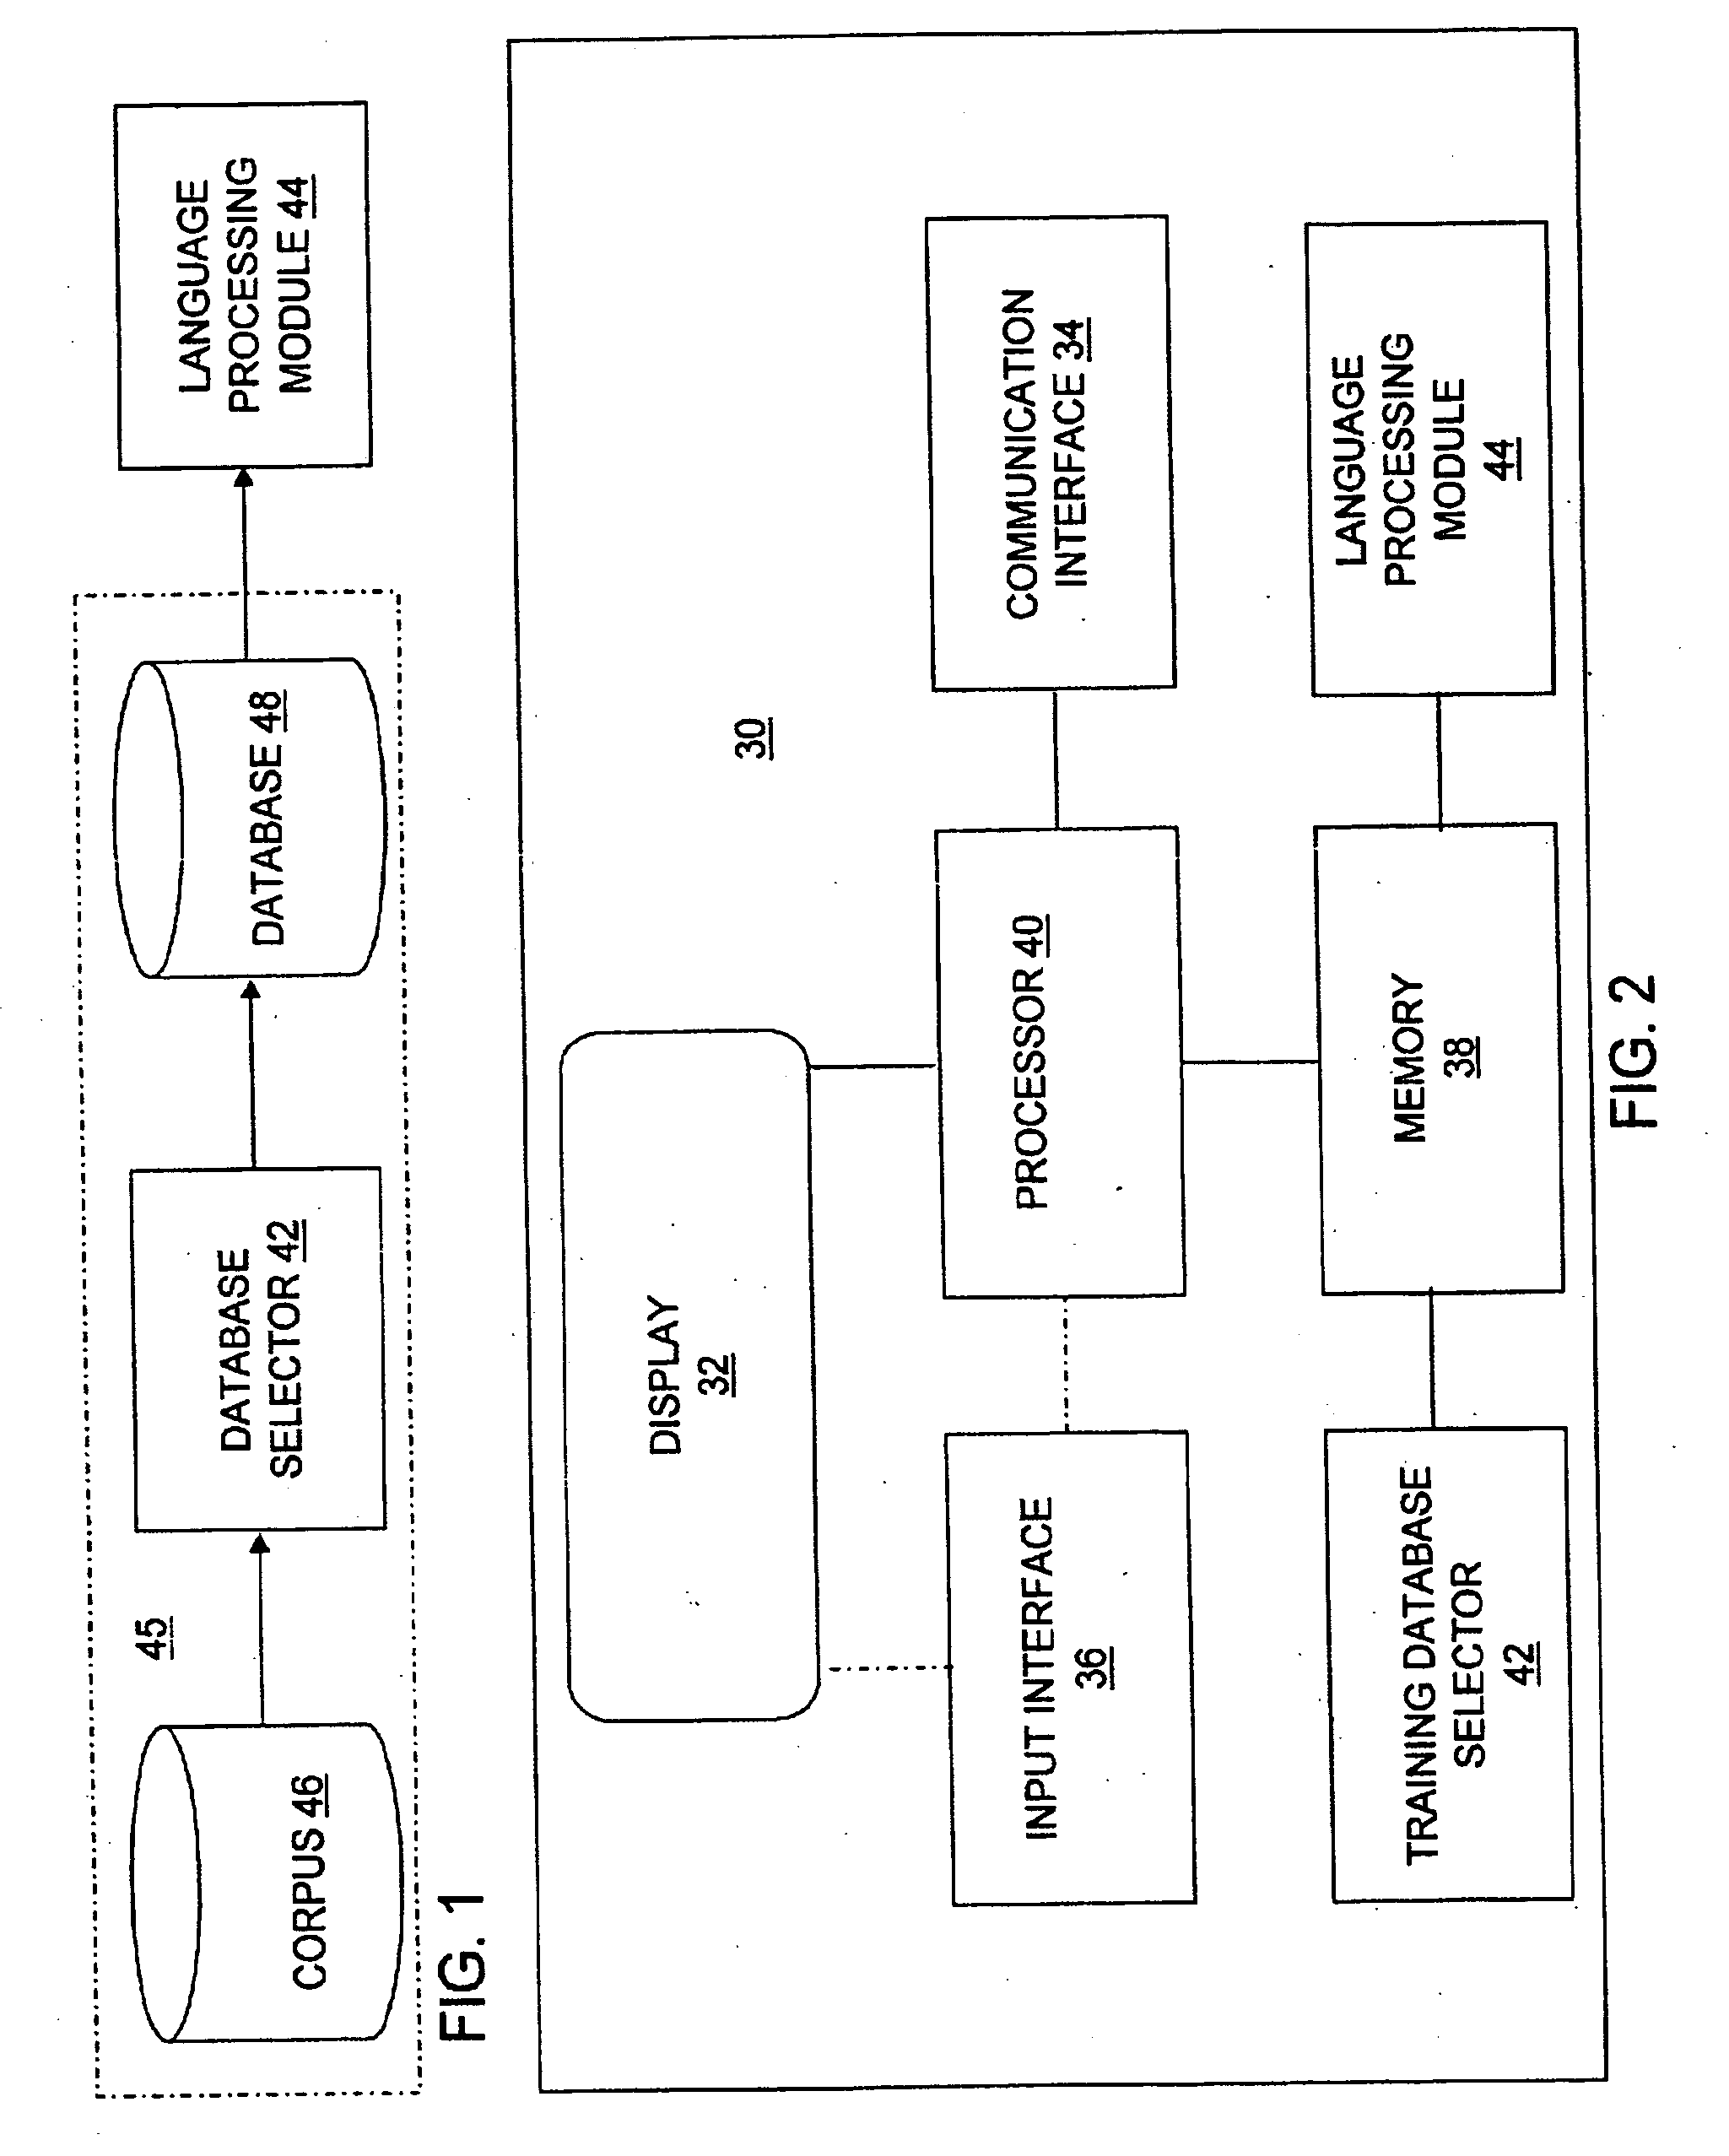 System and method for measuring confusion among words in an adaptive speech recognition system